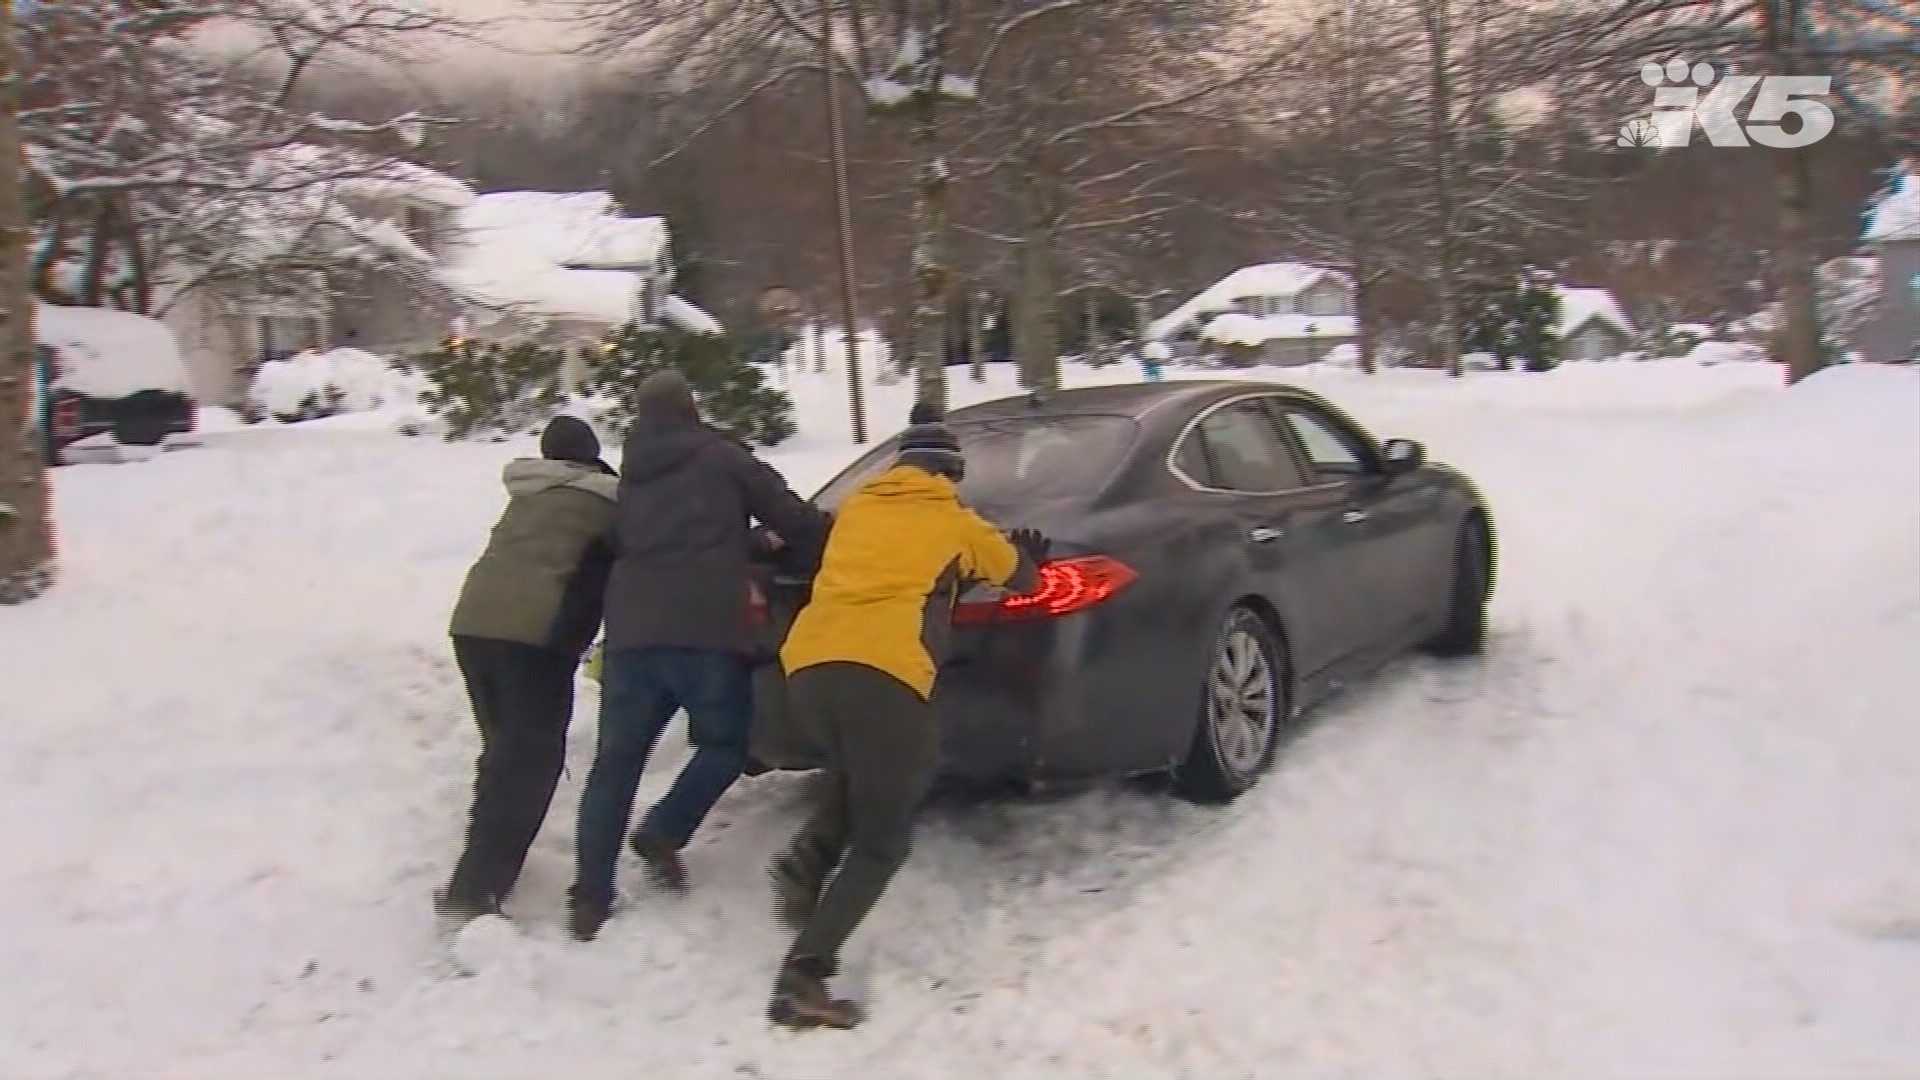 KING 5 Meteorologist Ben Dery helped some North Bend residents get their car unstuck from some deep snow.